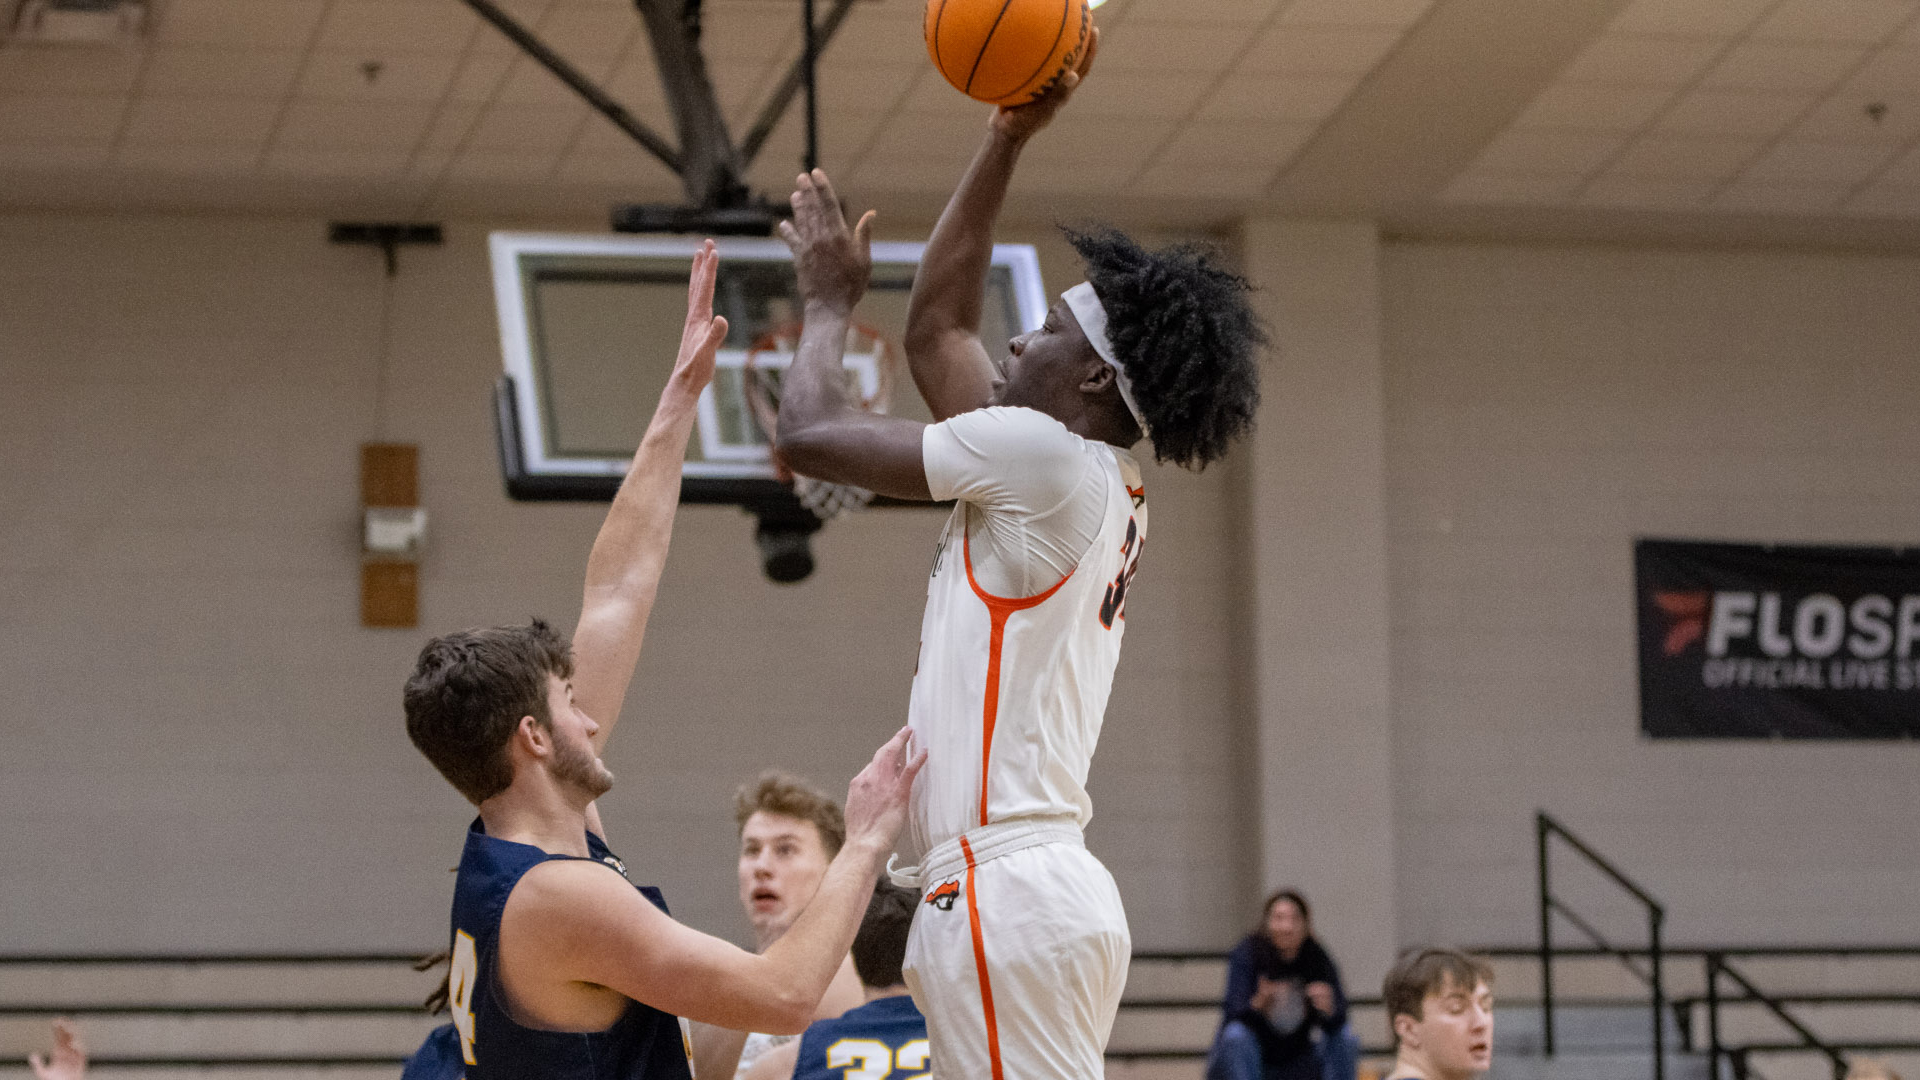 Tusculum's Akeem Odusipe posted his first collegiate double-double in the Pioneers' 84-72 win over Emory & Henry (photo by Kari Ham).